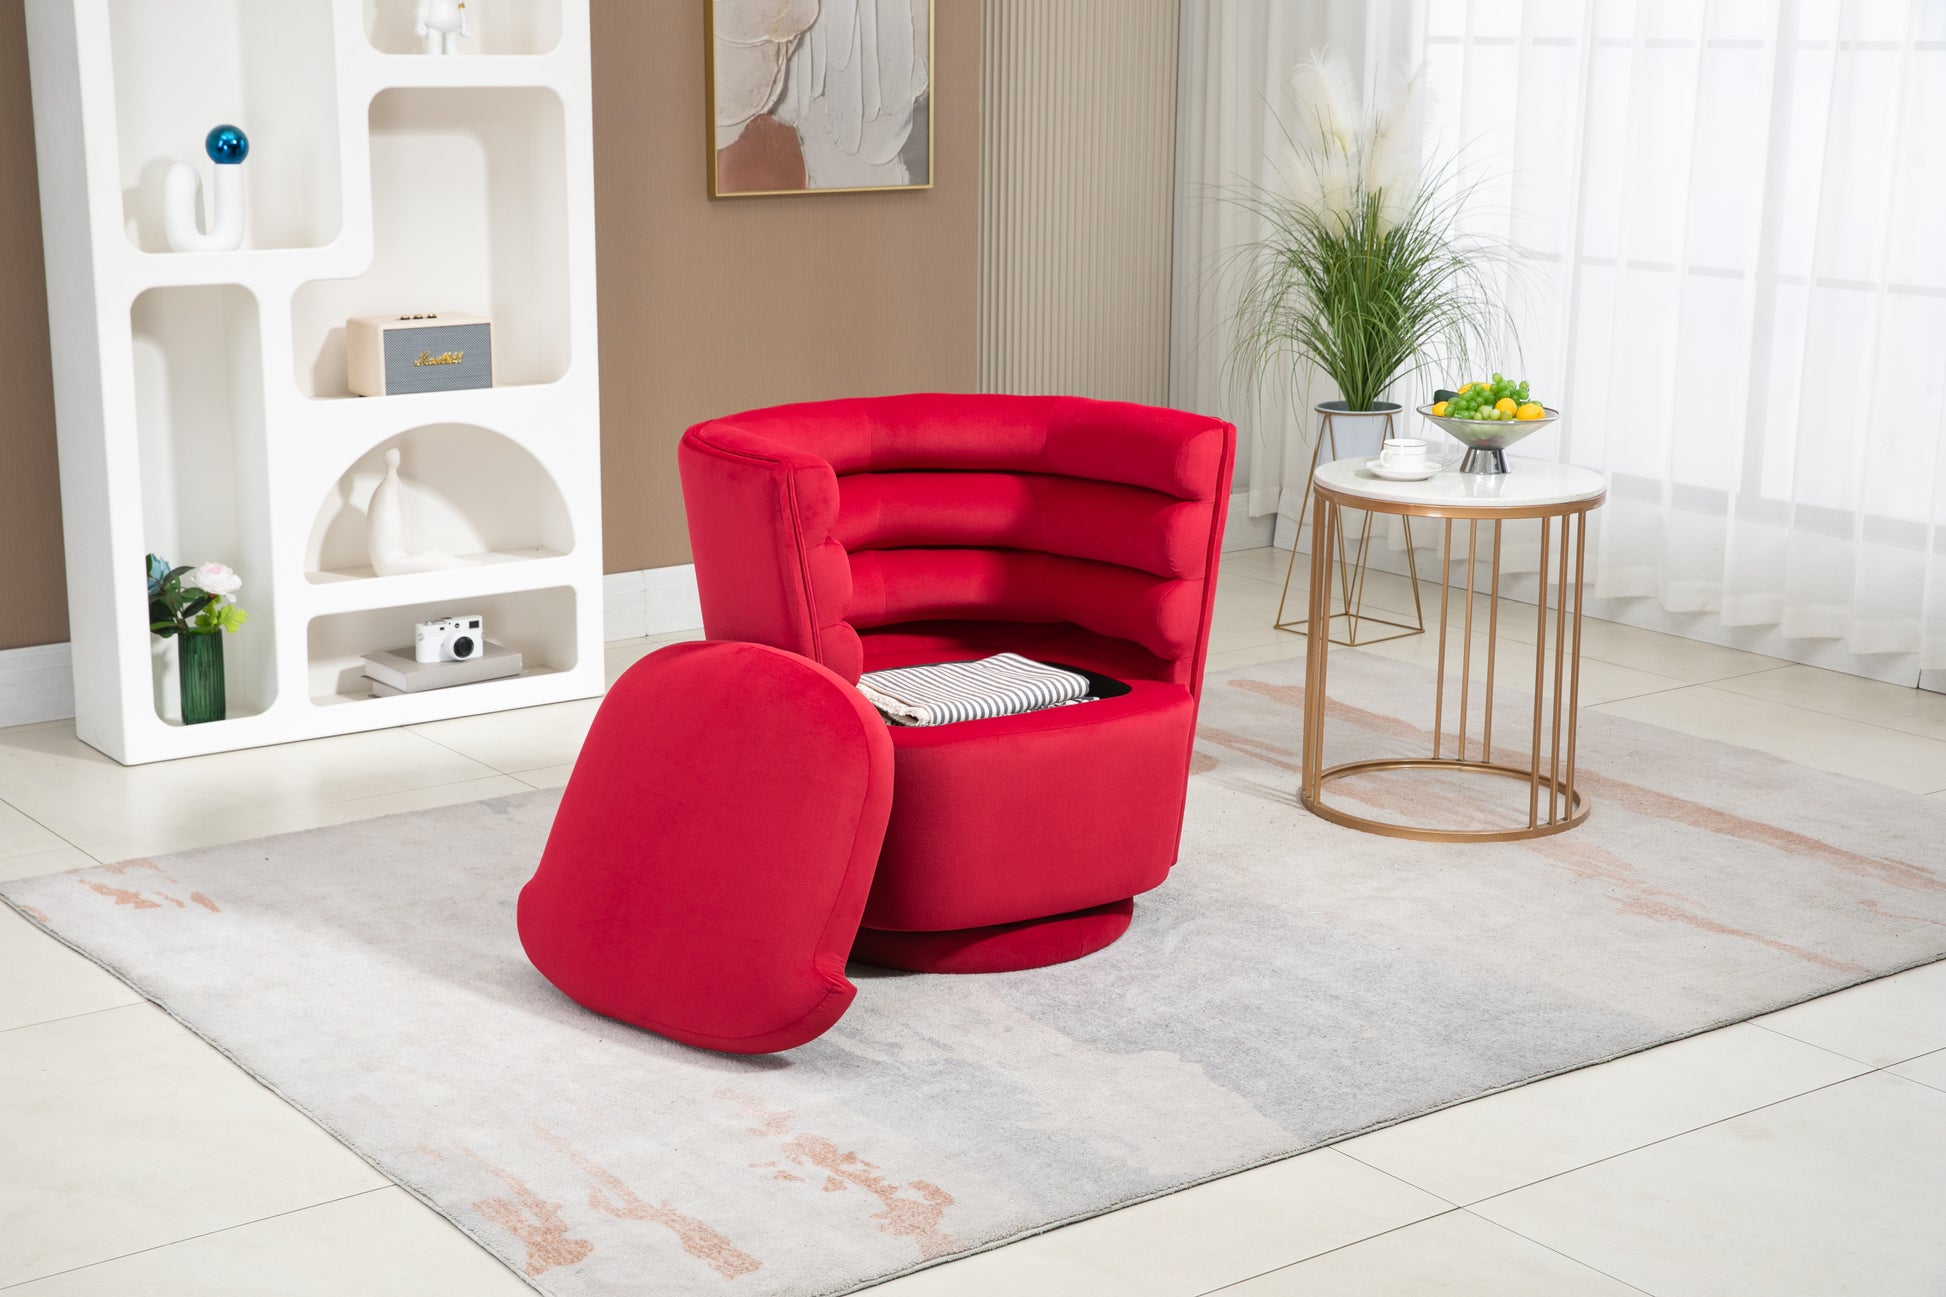 COOLMORE Swivel Barrel Chair, Comfy Round Accent  Chair with storage for Living Room, 360 Degree Swivel Barrel Club Chair, Leisure Arm Chair for Nursery, Hotel, Bedroom, Office - Enova Luxe Home Store